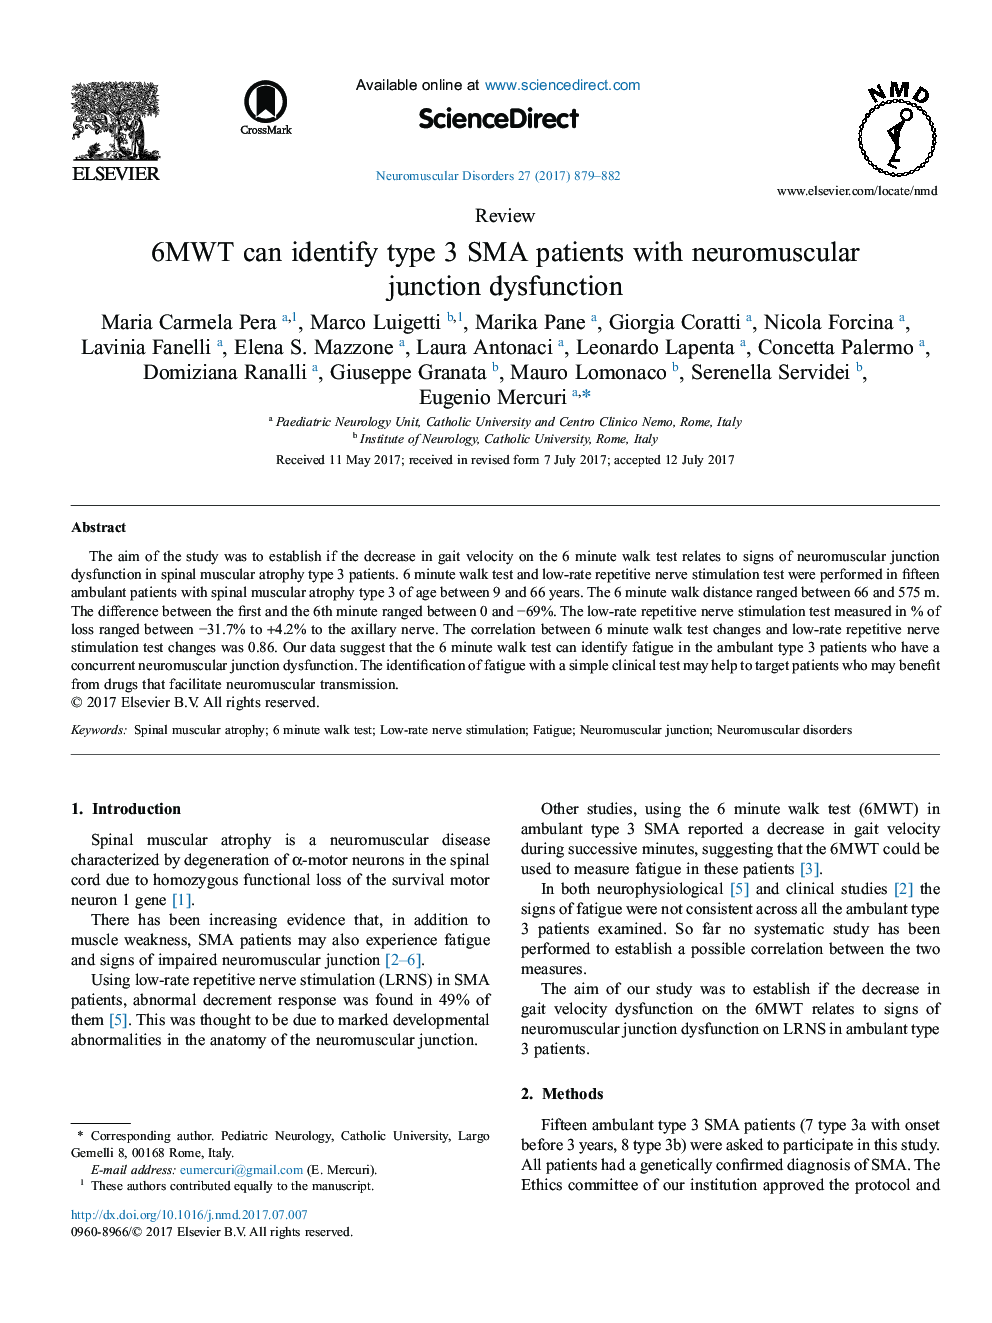 6MWT can identify type 3 SMA patients with neuromuscular junction dysfunction